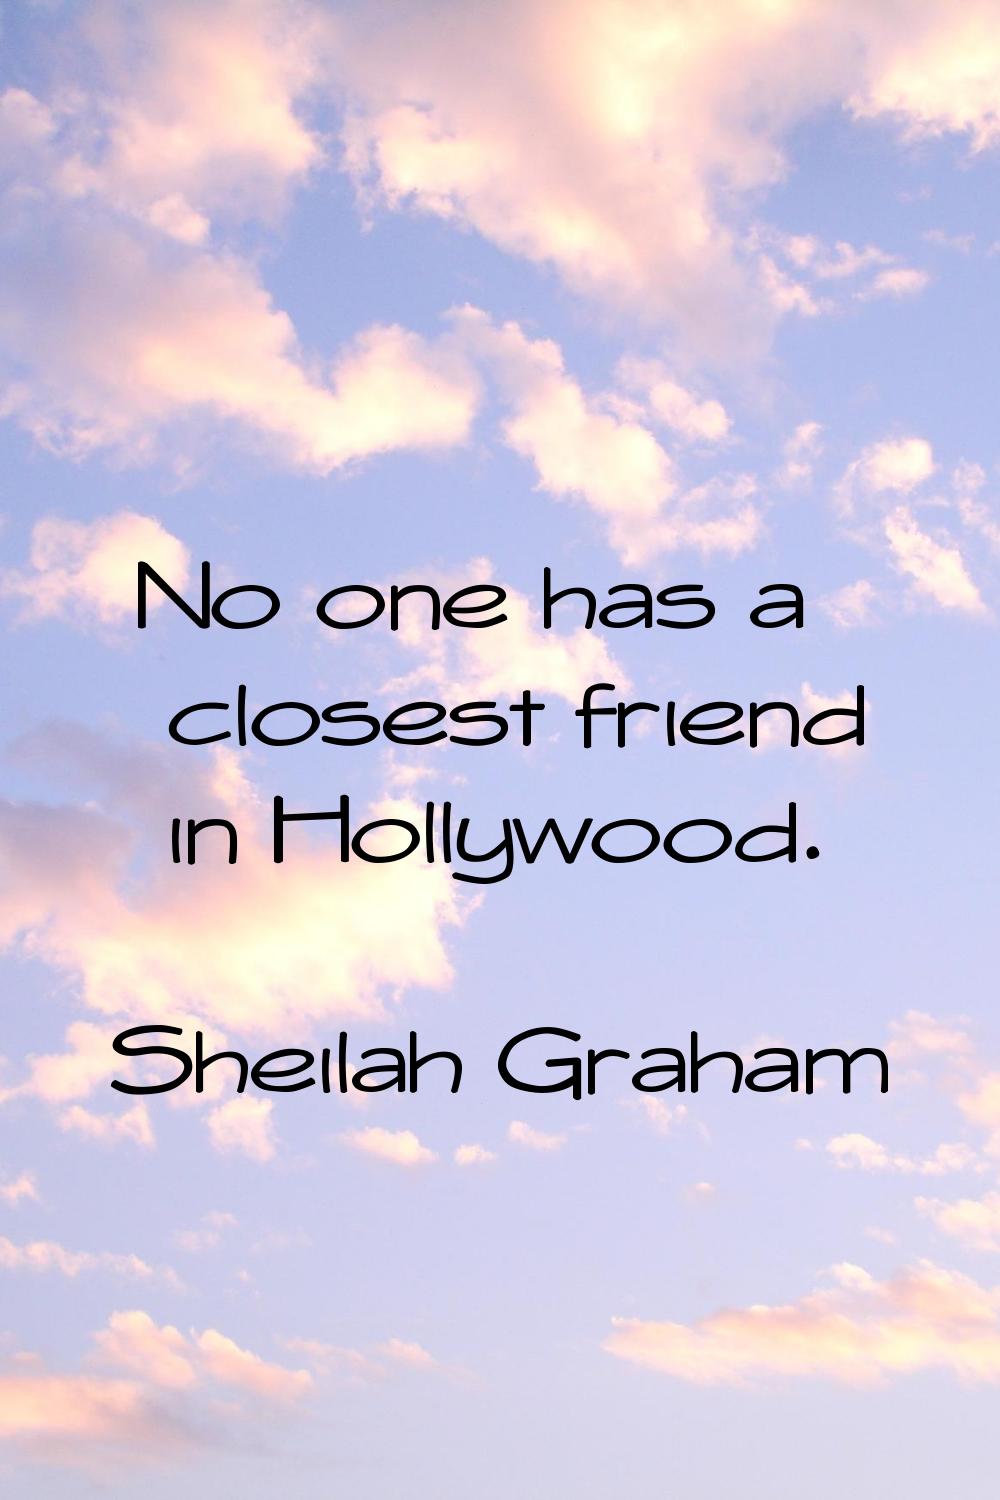 No one has a closest friend in Hollywood.